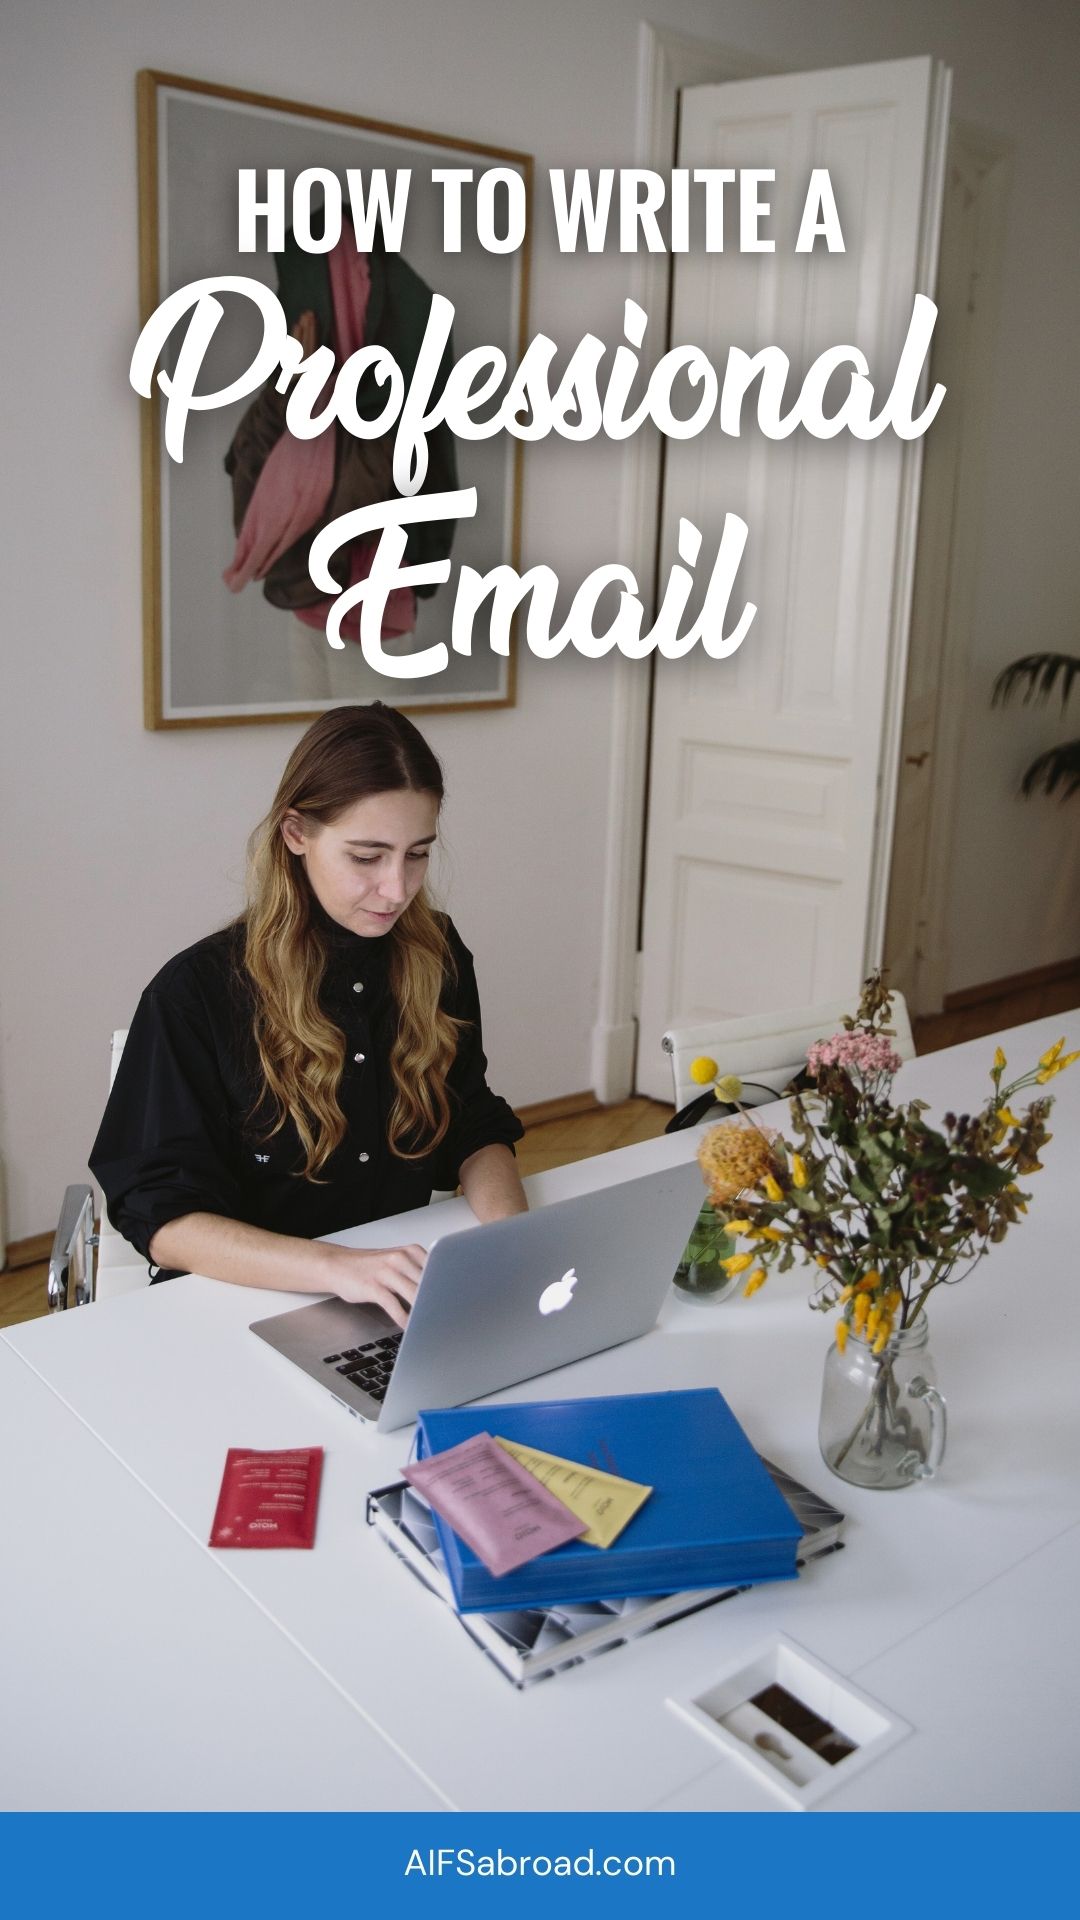 Pin image: Young woman at laptop in home office with text "How to Write a Professional Email: